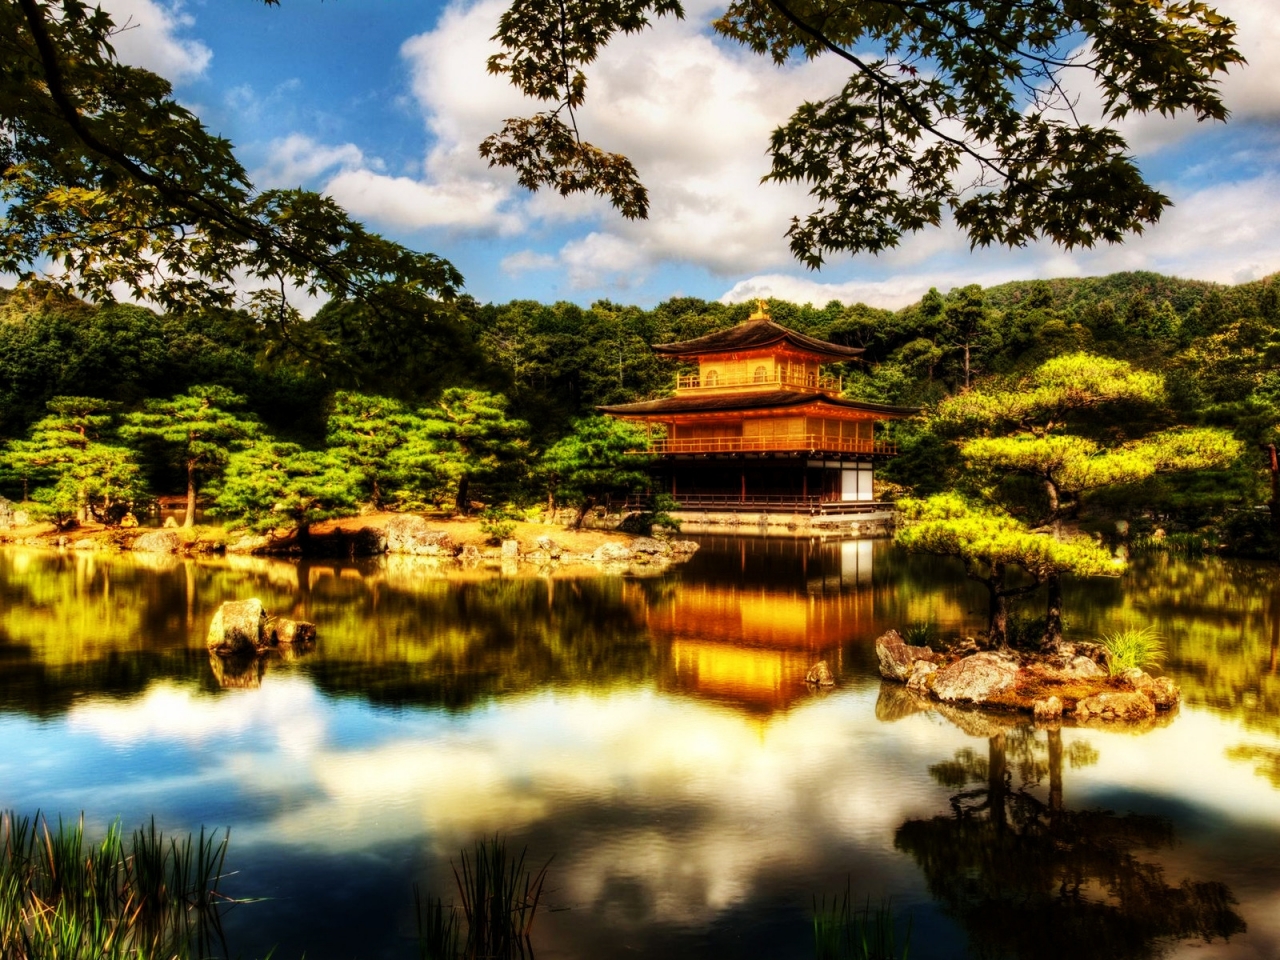 Great Japanese Temple for 1280 x 960 resolution